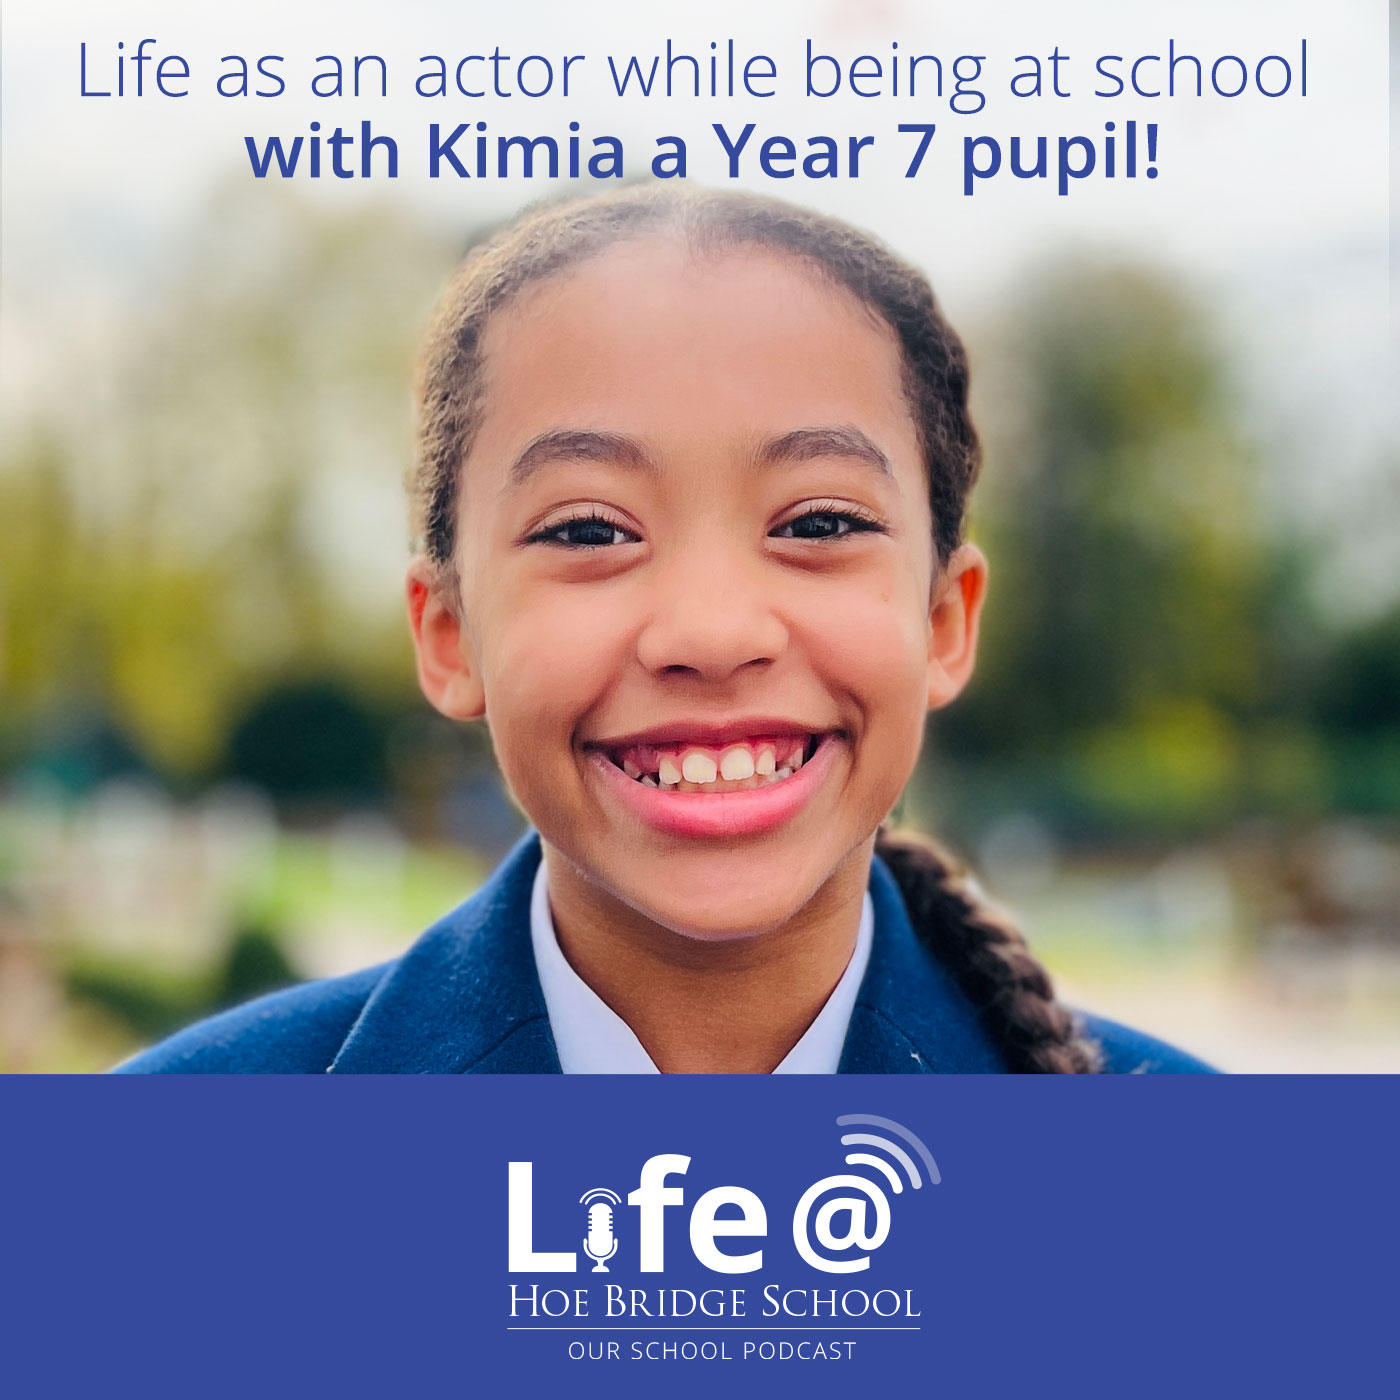 Life as an actor while being at school with Kimia a Year 7 pupil